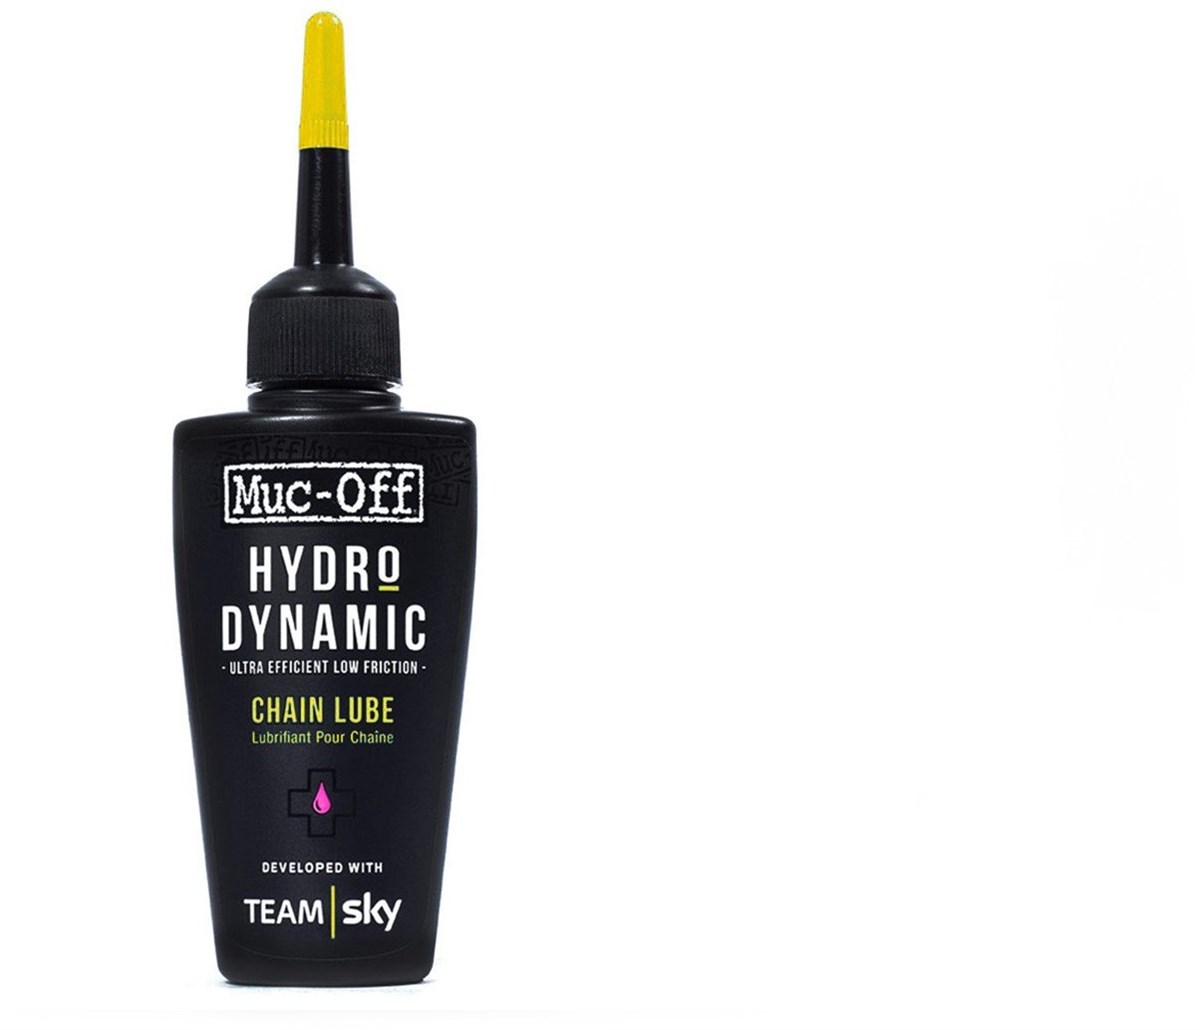 Muc-Off Hydrodynamic Team Sky Lube 50ml - Yellow Jersey Edition product image